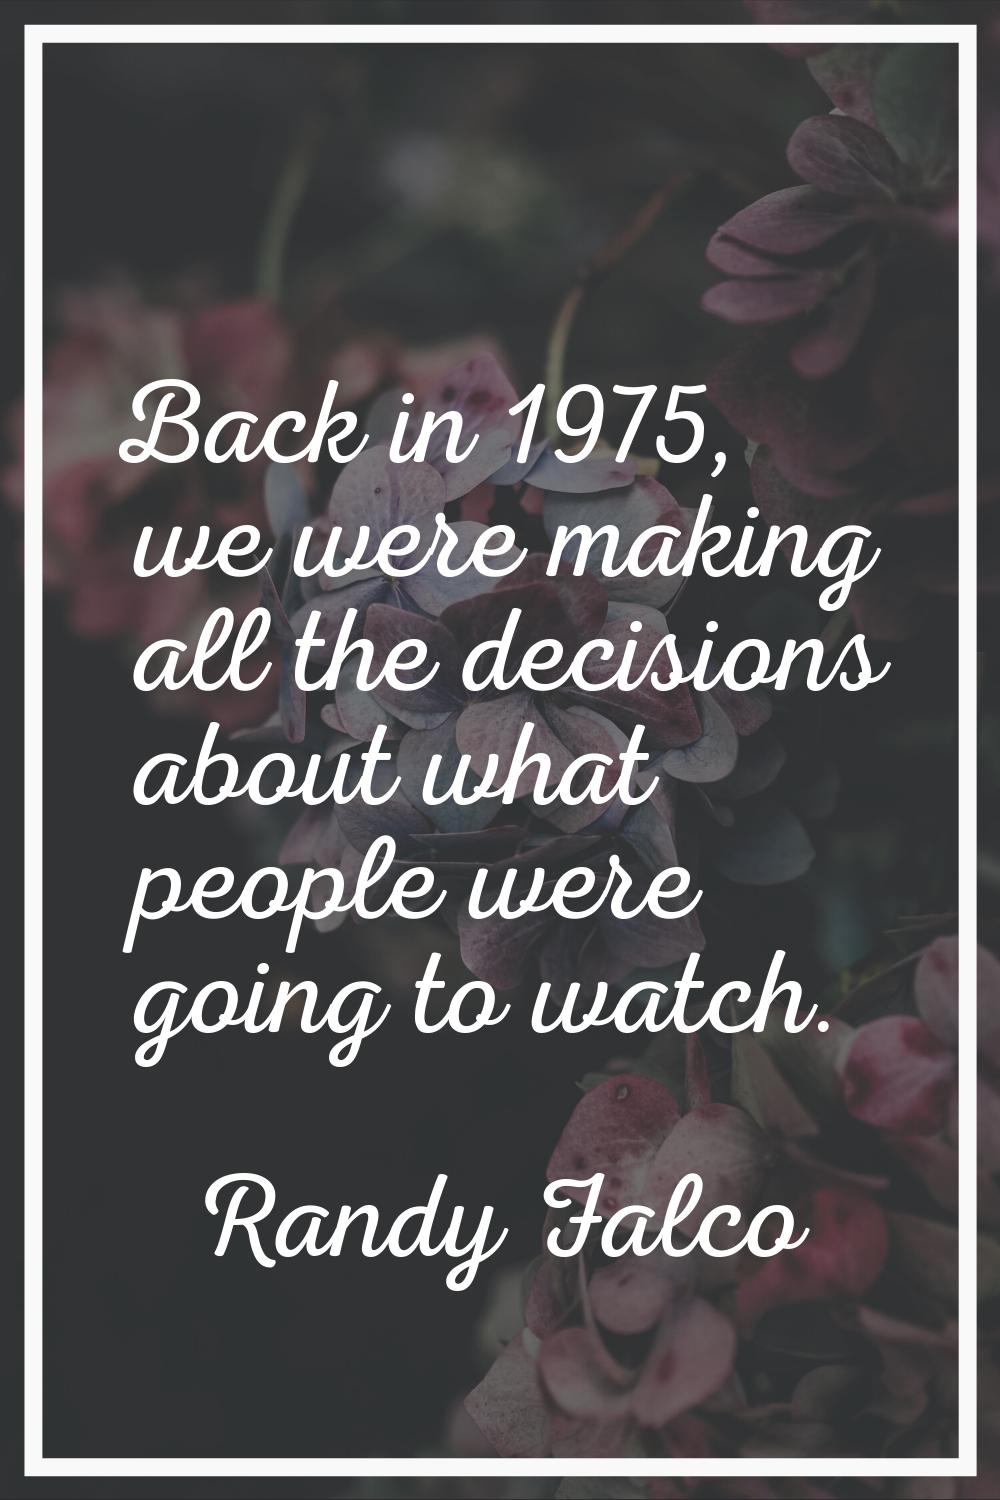 Back in 1975, we were making all the decisions about what people were going to watch.